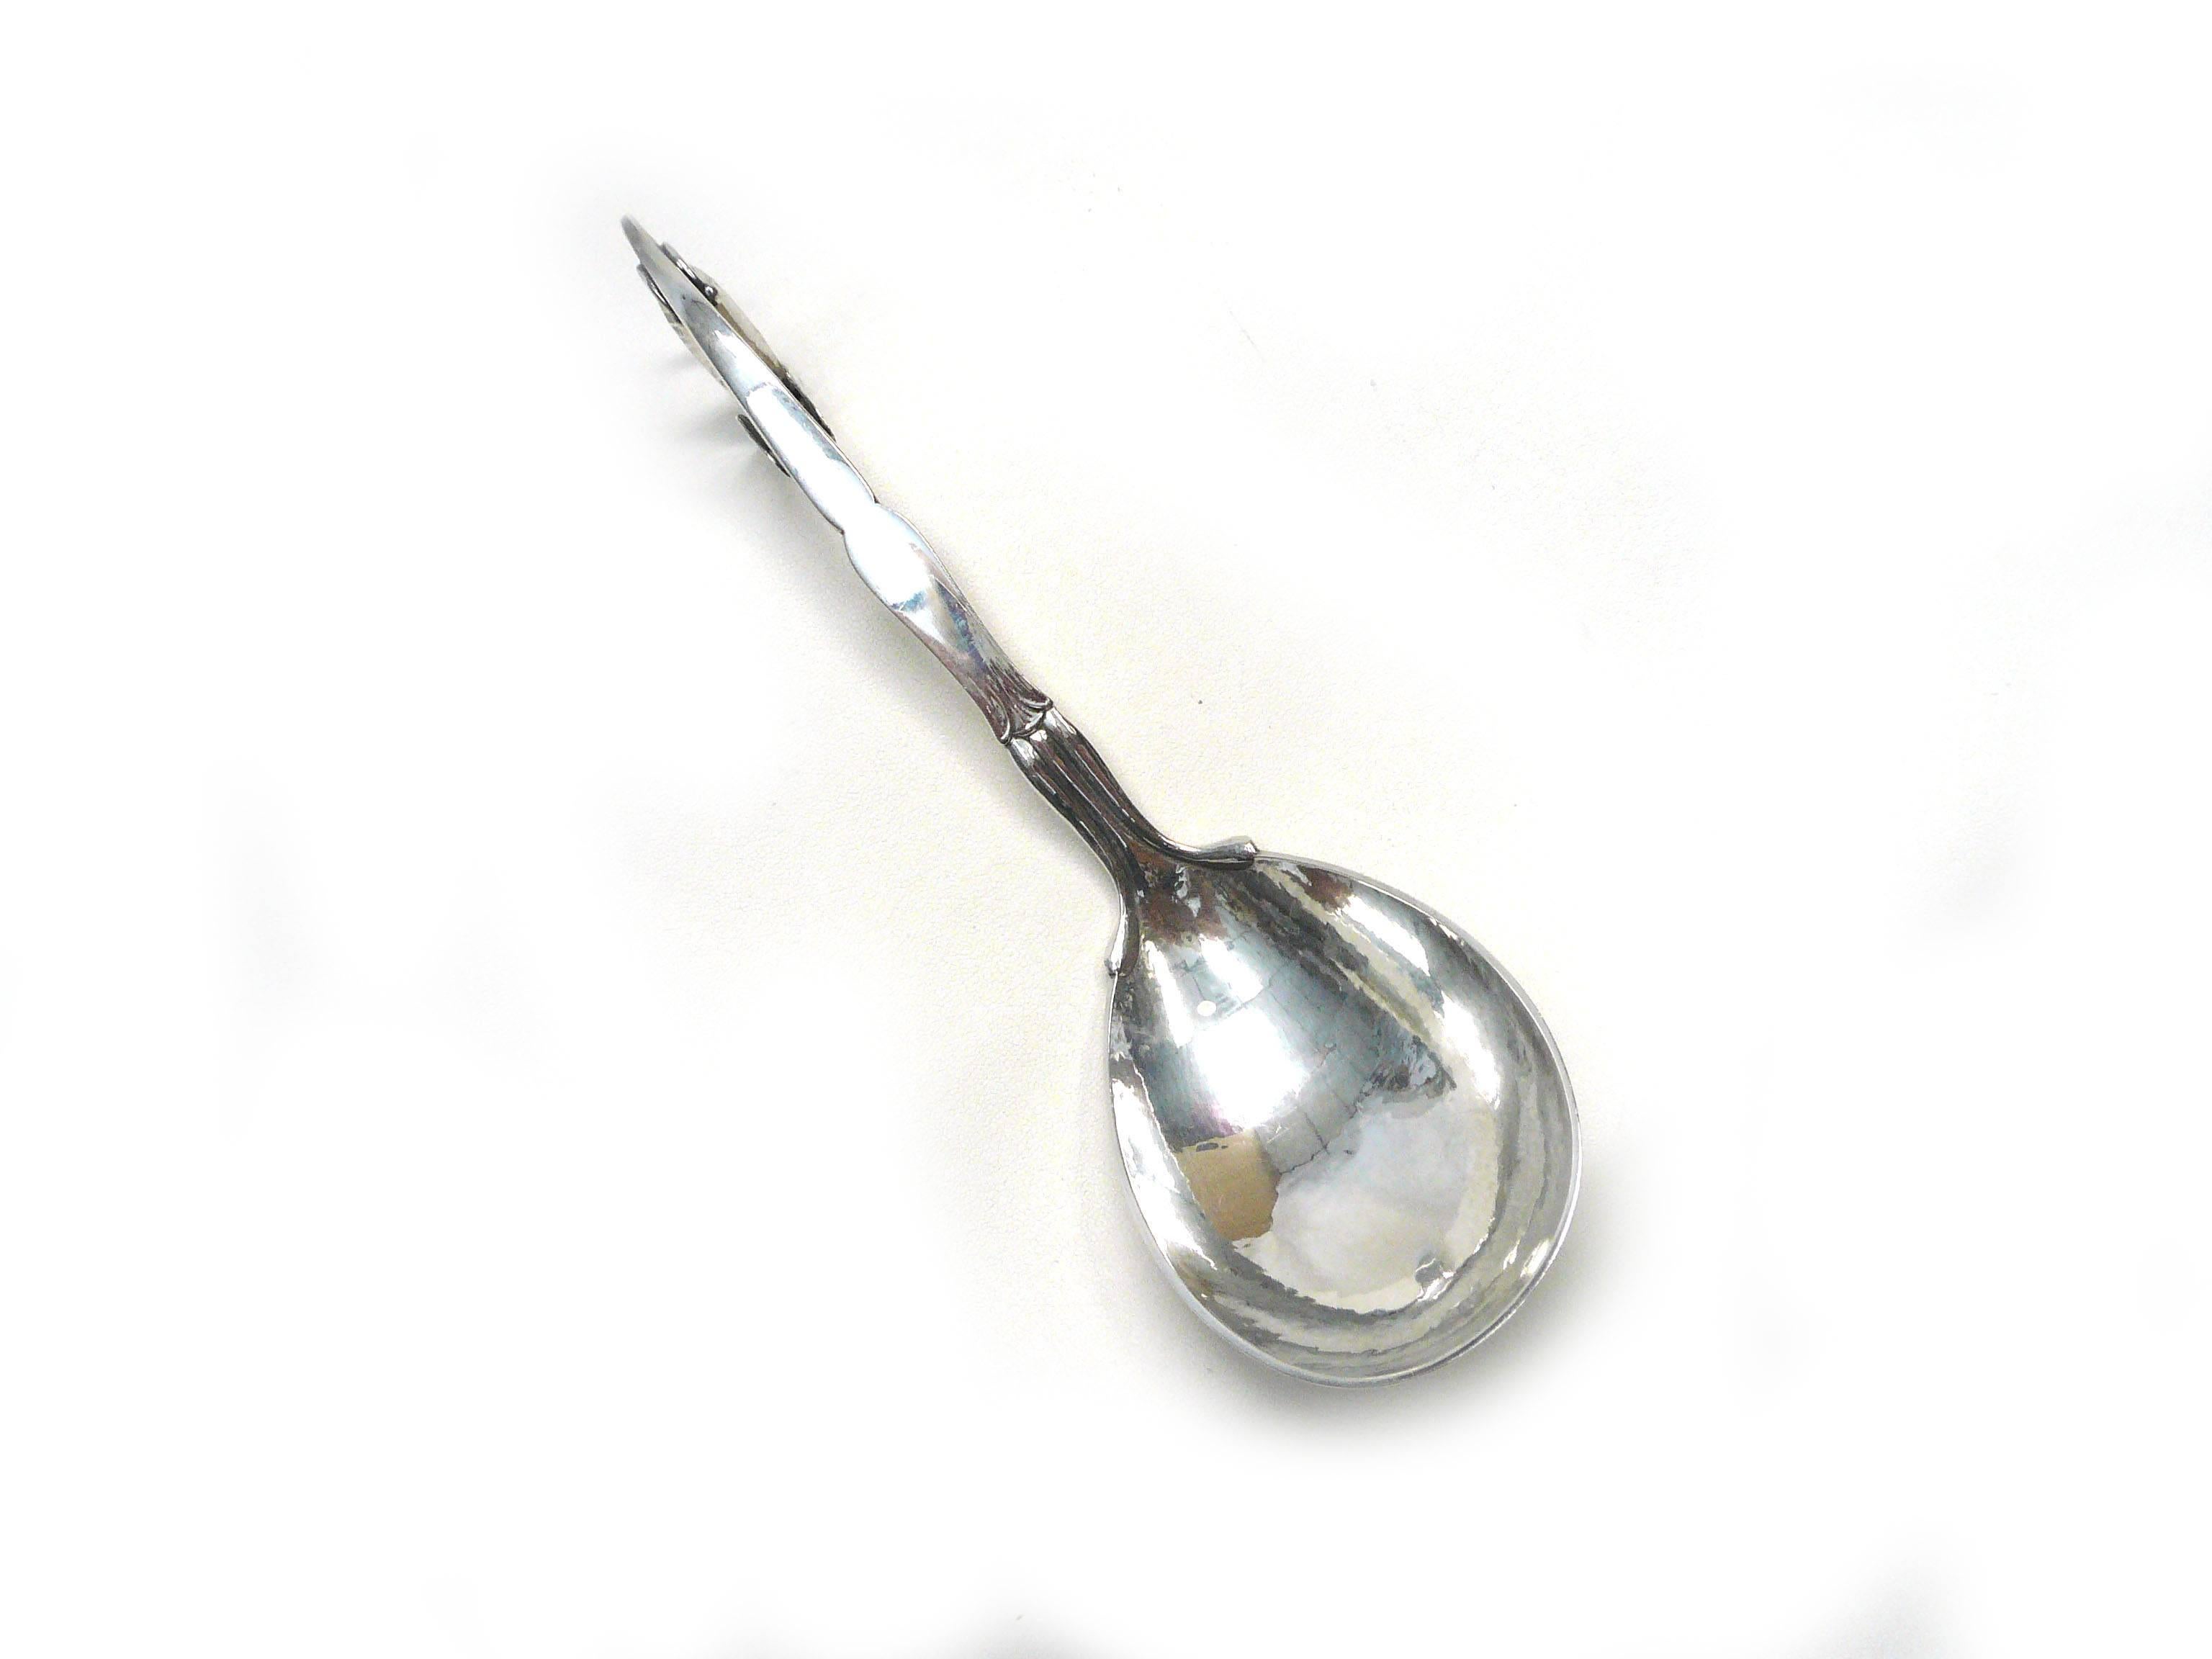 Rare sterling ladle from the Georg Jensen Unique Serving Piece Collection.
Our ladle measures 8